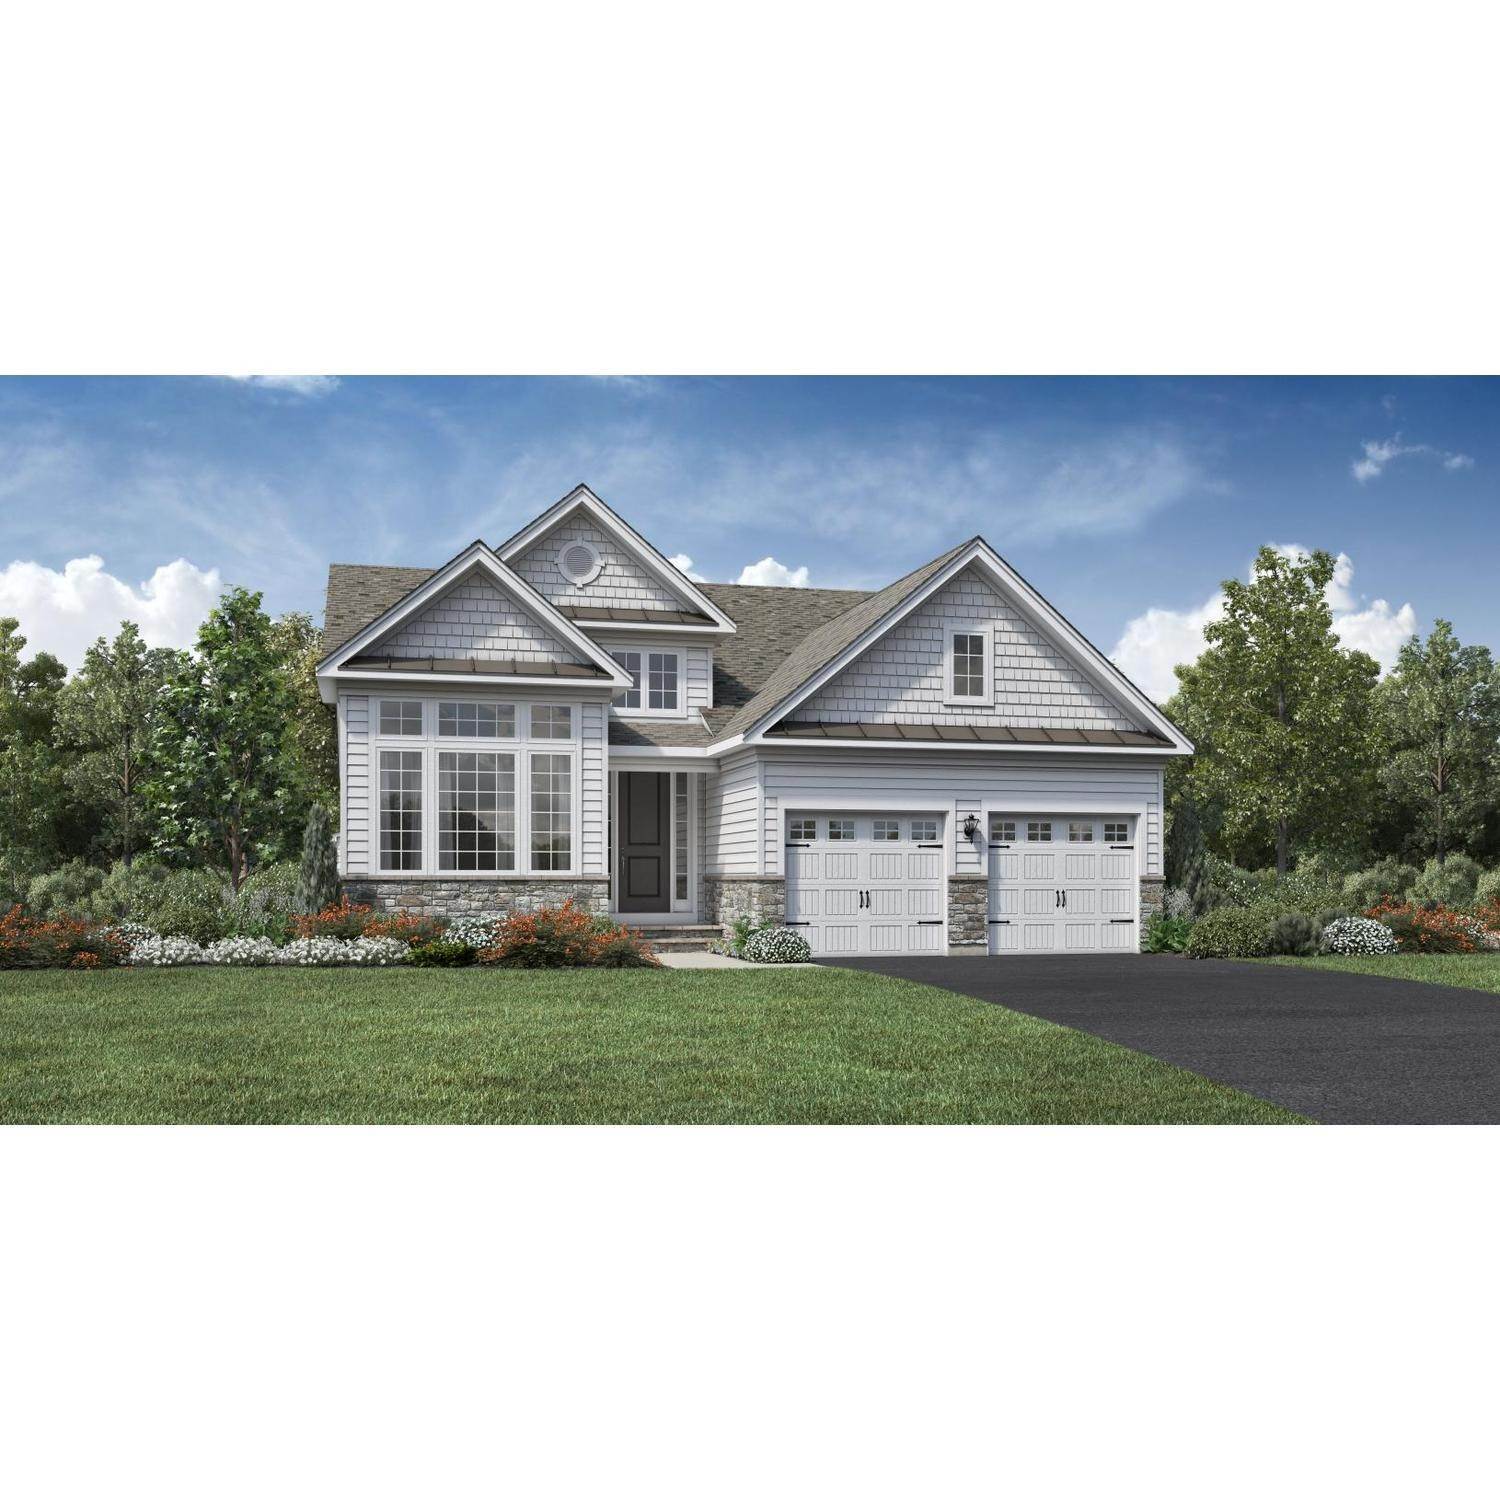 Single Family for Sale at Tyngsborough, MA 01879